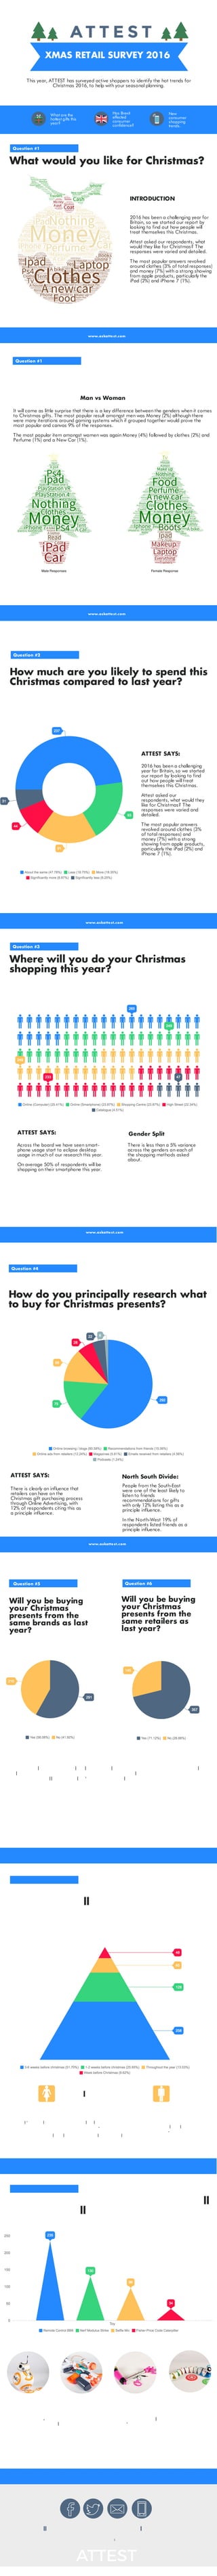 XMAS RETAIL SURVEY 2016
This year, ATTEST has surveyed active shoppers to identify the hot trends for
Christmas 2016, to help with your seasonal planning.
What are the
hottest gifts this
year?
Has Brexit
effected
consumer
confidence?
New
consumer
shopping
trends.
What would you like for Christmas?
Question #1
2016 has been a challenging year for
Britain, so we started our report by
looking to find out how people will
treat themselves this Christmas.
Attest asked our respondents, what
would they like for Christmas? The
responses were varied and detailed.
The most popular answers revolved
around clothes (3% of total responses)
and money (7%) with a strong showing
from apple products, particularly the
iPad (2%) and iPhone 7 (1%).
INTRODUCTION
www.askattest.com
It will come as little surprise that there is a key difference between the genders when it comes
to Christmas gifts. The most popular result amongst men was Money (2%) although there
were many iterations around gaming systems which if grouped together would prove the
most popular and canvas 9% of the responses.
The most popular item amongst women was again Money (4%) followed by clothes (2%) and
Perfume (1%) and a New Car (1%).
Man vs Woman
www.askattest.com
Male Responses Female Response
Question #1
How much are you likely to spend this
Christmas compared to last year?
Question #2
2016 has been a challenging
year for Britain, so we started
our report by looking to find
out how people will treat
themselves this Christmas.
Attest asked our
respondents, what would they
like for Christmas? The
responses were varied and
detailed.
The most popular answers
revolved around clothes (3%
of total responses) and
money (7%) with a strong
showing from apple products,
particularly the iPad (2%) and
iPhone 7 (1%).
ATTEST SAYS:
www.askattest.com
Where will you do your Christmas
shopping this year?
Question #3
Across the board we have seen smart-
phone usage start to eclipse desktop
usage in much of our research this year.
On average 50% of respondents will be
shopping on their smartphone this year.
ATTEST SAYS:
www.askattest.com
Gender Split
There is less than a 5% variance
across the genders on each of
the shopping methods asked
about.
How do you principally research what
to buy for Christmas presents?
Question #4
There is clearly an influence that
retailers can have on the
Christmas gift purchasing process
through Online Advertising, with
12% of respondents citing this as
a principle influence.
ATTEST SAYS:
www.askattest.com
North South Divide:
People from the South-East
were one of the least likely to
listen to friends
recommendations for gifts
with only 12% listing this as a
principle influence.
In the North-West 19% of
respondents listed friends as a
principle influence.
Will you be buying
your Christmas
presents from the
same brands as last
year?
Question #5
There is a clear increase in loyalty for retailers over brands. Something that could
influence future discussions between brands and retailers as prices are squeezed
this Christmas following Sterling's decrease in value.
ATTEST SAYS:
www.askattest.com
Will you be buying
your Christmas
presents from the
same retailers as
last year?
Question #6
When did / will you buy the majority
of your Christmas gifts?
Question #7
www.askattest.com
Battle of the Sexes
It's official, women tend to be slightly more organised than men buying their gifts. 57% of
women buy their Christmas presents 3-6 months before Christmas day, whilst only 42% of
men purchase their presents at this time. 33% of men purchase presents 1-2 weeks before
Christmas, whilst only 21% of women leave it this late.
Which of these toys do you predict will
be the best selling this Christmas?
Question #9
Here are our top-picks for the top toys this Christmas, remote control BB8 is out in front,
tweet us @askattest to let us know whether you think we've got it right.
ATTEST SAYS:
www.askattest.com
Follow us and stay updated on our latest research.
Research and compiled by:
 